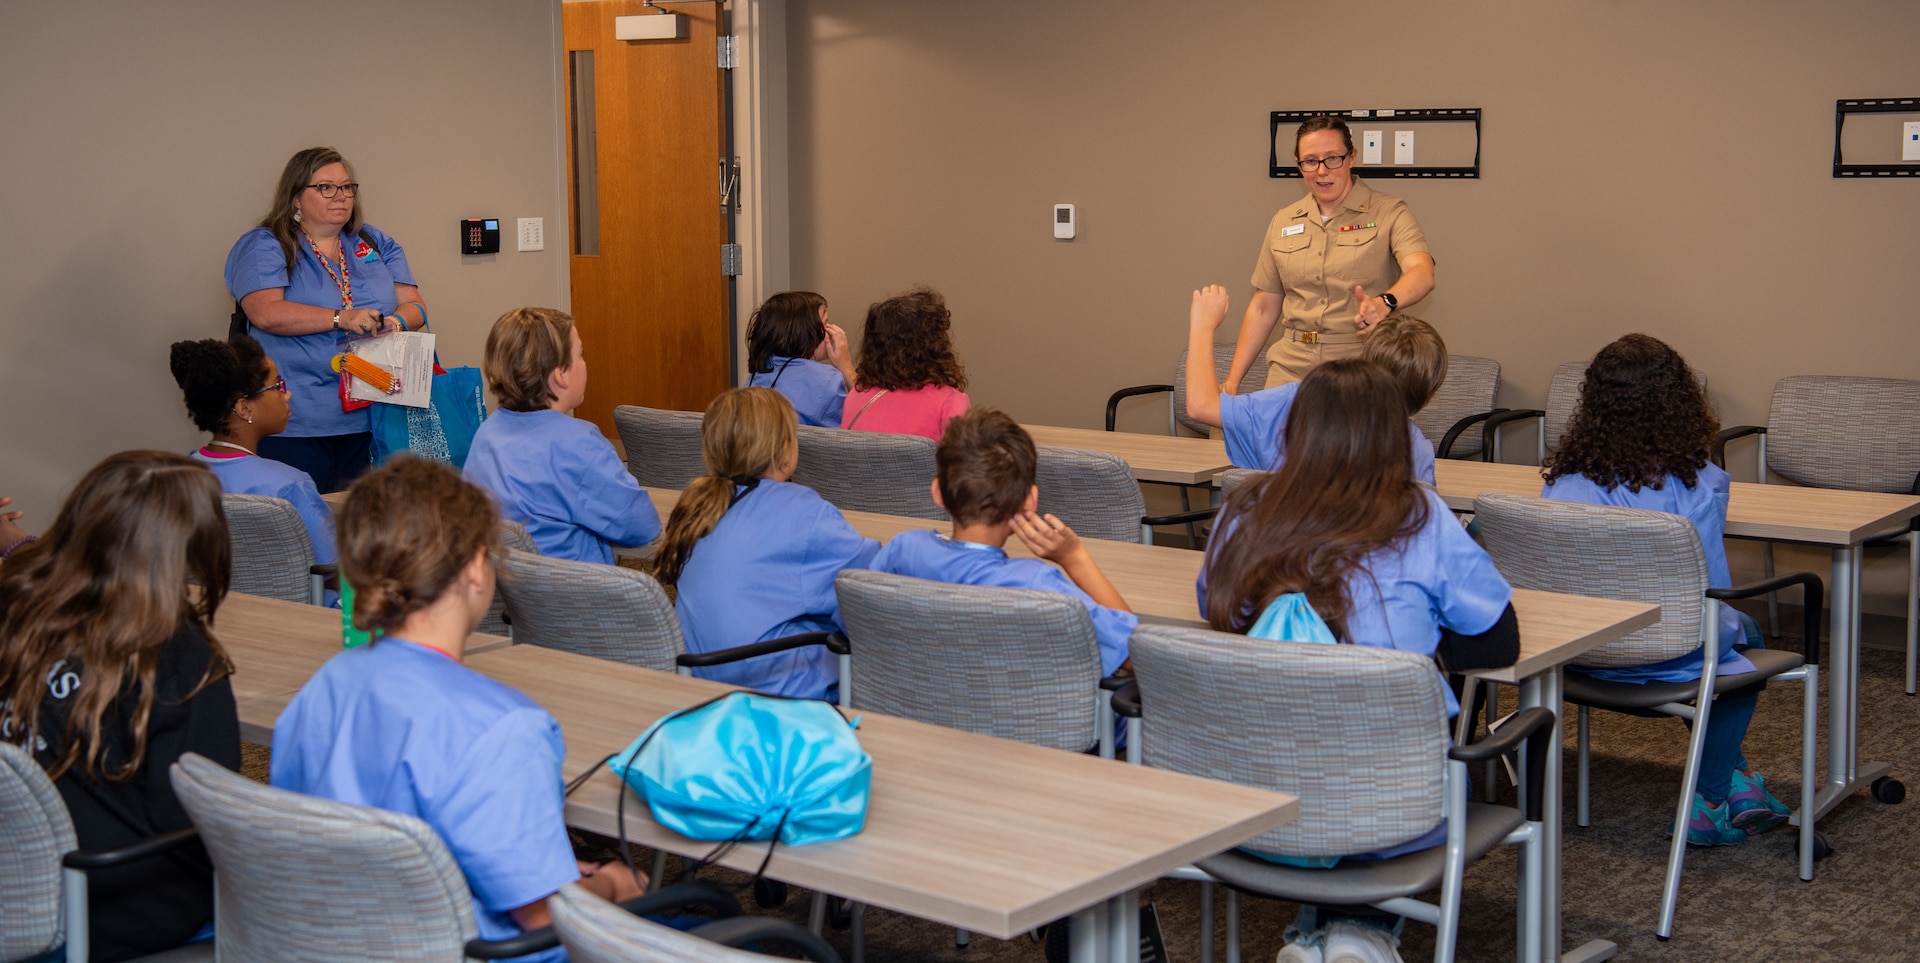 Lt. Kristen Shafer, STEM outreach coordinator and emergency medicine resident, explains naval uniforms and the naval hospital to elementary school students from Starbase Victory MedBase summer camp July 26 at Naval Medical Center Portsmouth. The tour was part of an effort by the school district to expose children to the world of STEM. (U.S. Navy photo by Mass Communication Specialist 2nd Class Dylan M. Kinee)